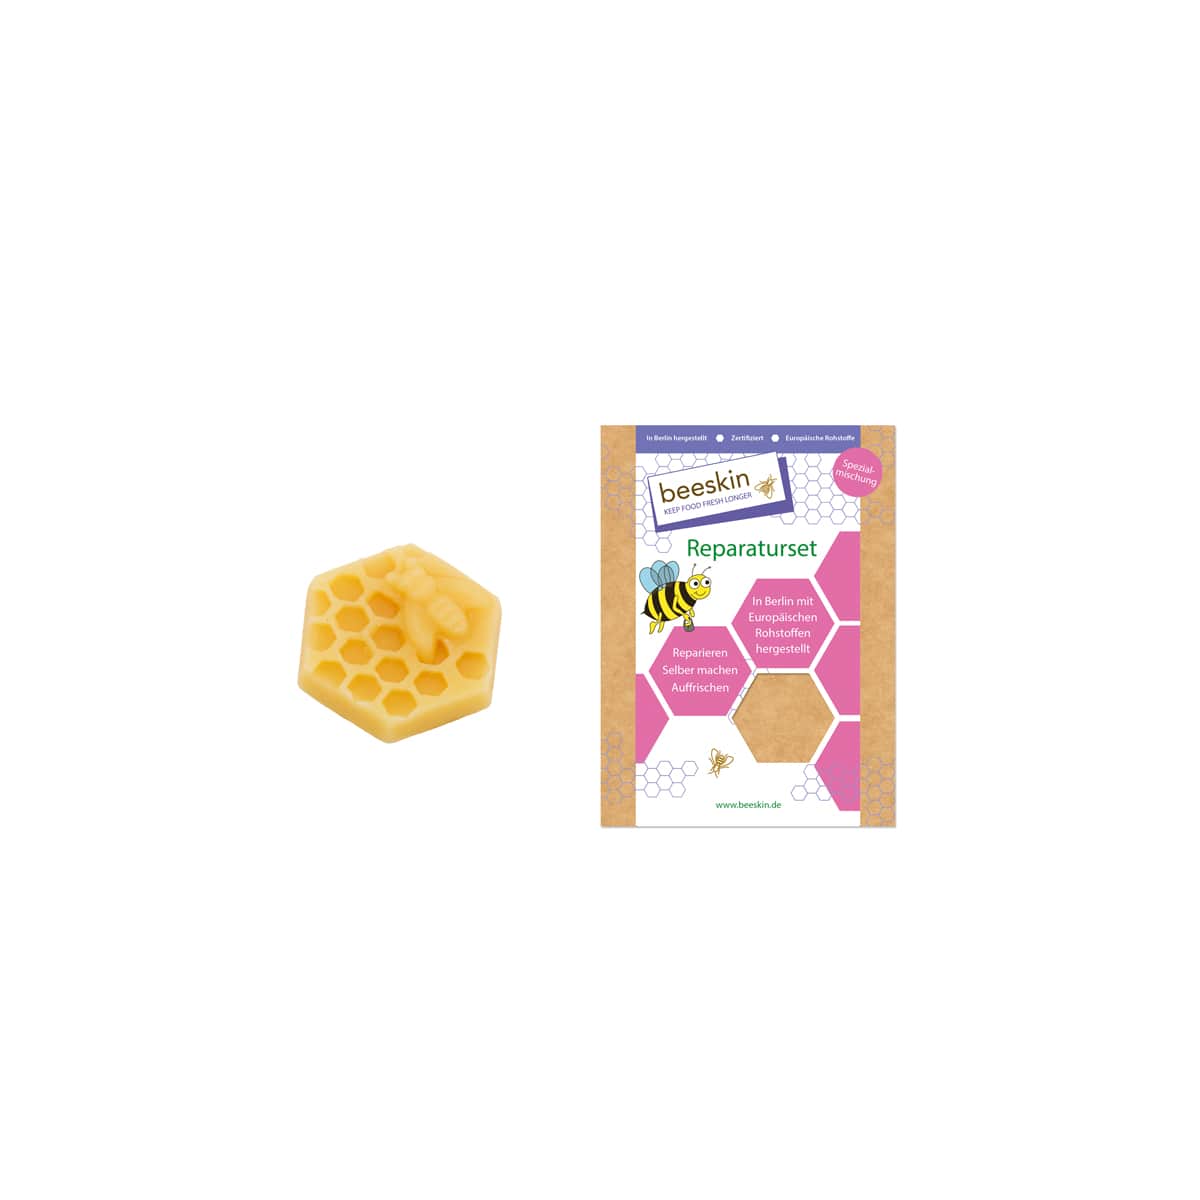 repair kit for beeswax wraps formed as a honeycomb next to packaging